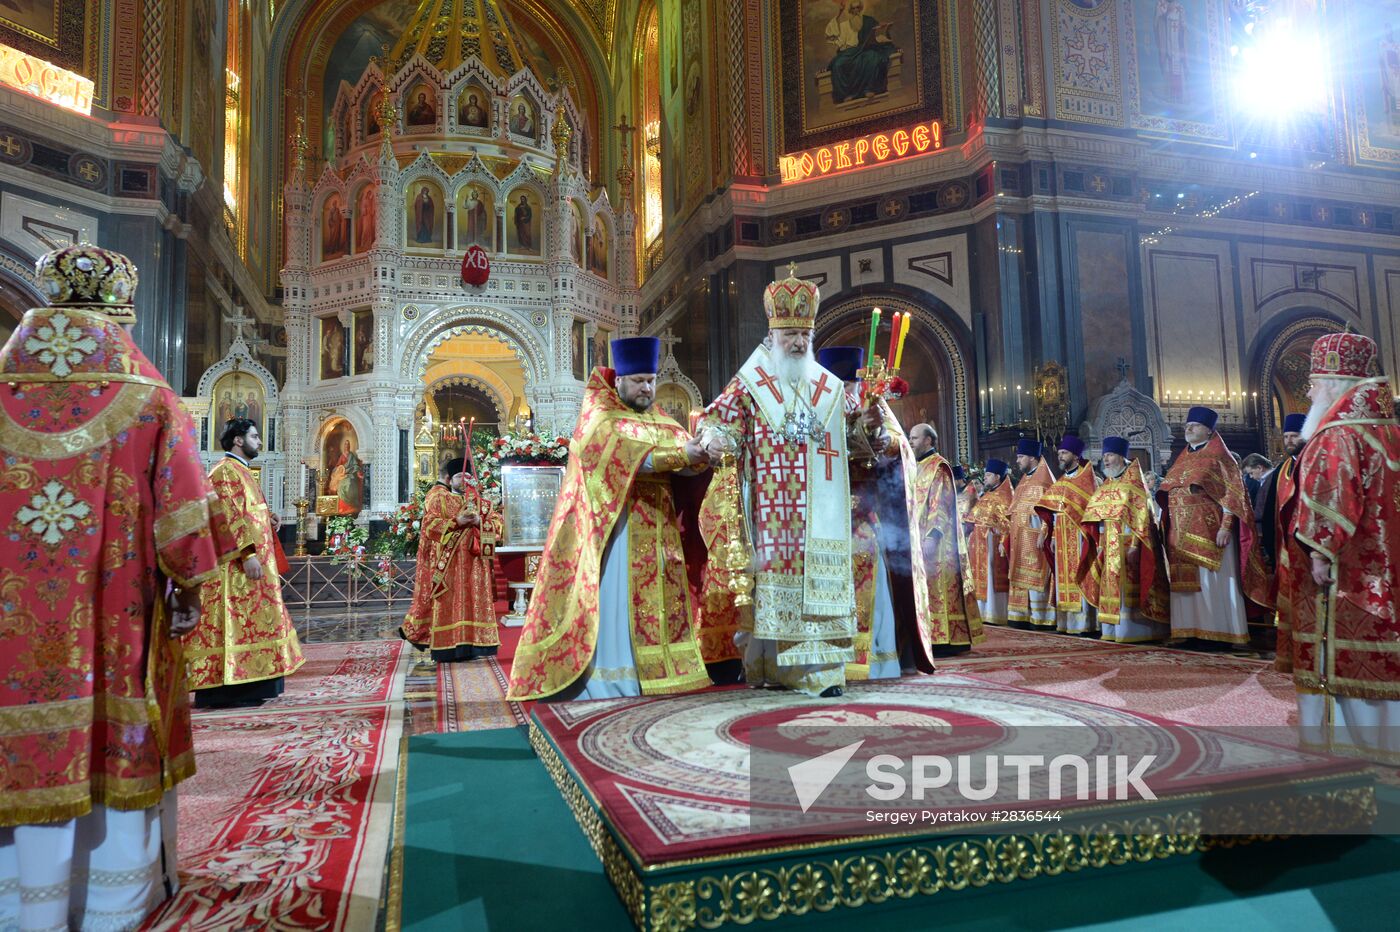 Easter service at Christ the Savior Cathedral in Moscow